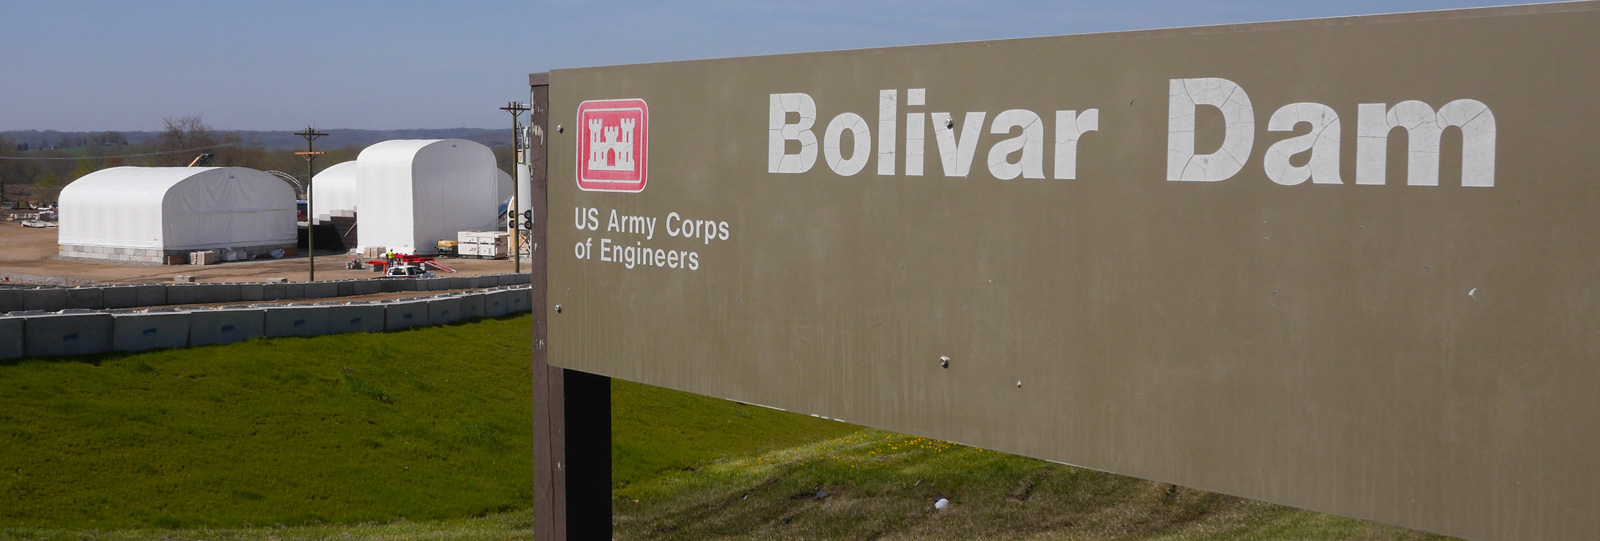 THE U.S. ARMY CORPS OF ENGINEERS, HUNTINGTON DISTRICT, HAS AWARDED TREVIICOS THE CONSTRUCTION OF THE SEEPAGE BARRIER AT BOLIVAR DAM IN OHIO Treviiicos